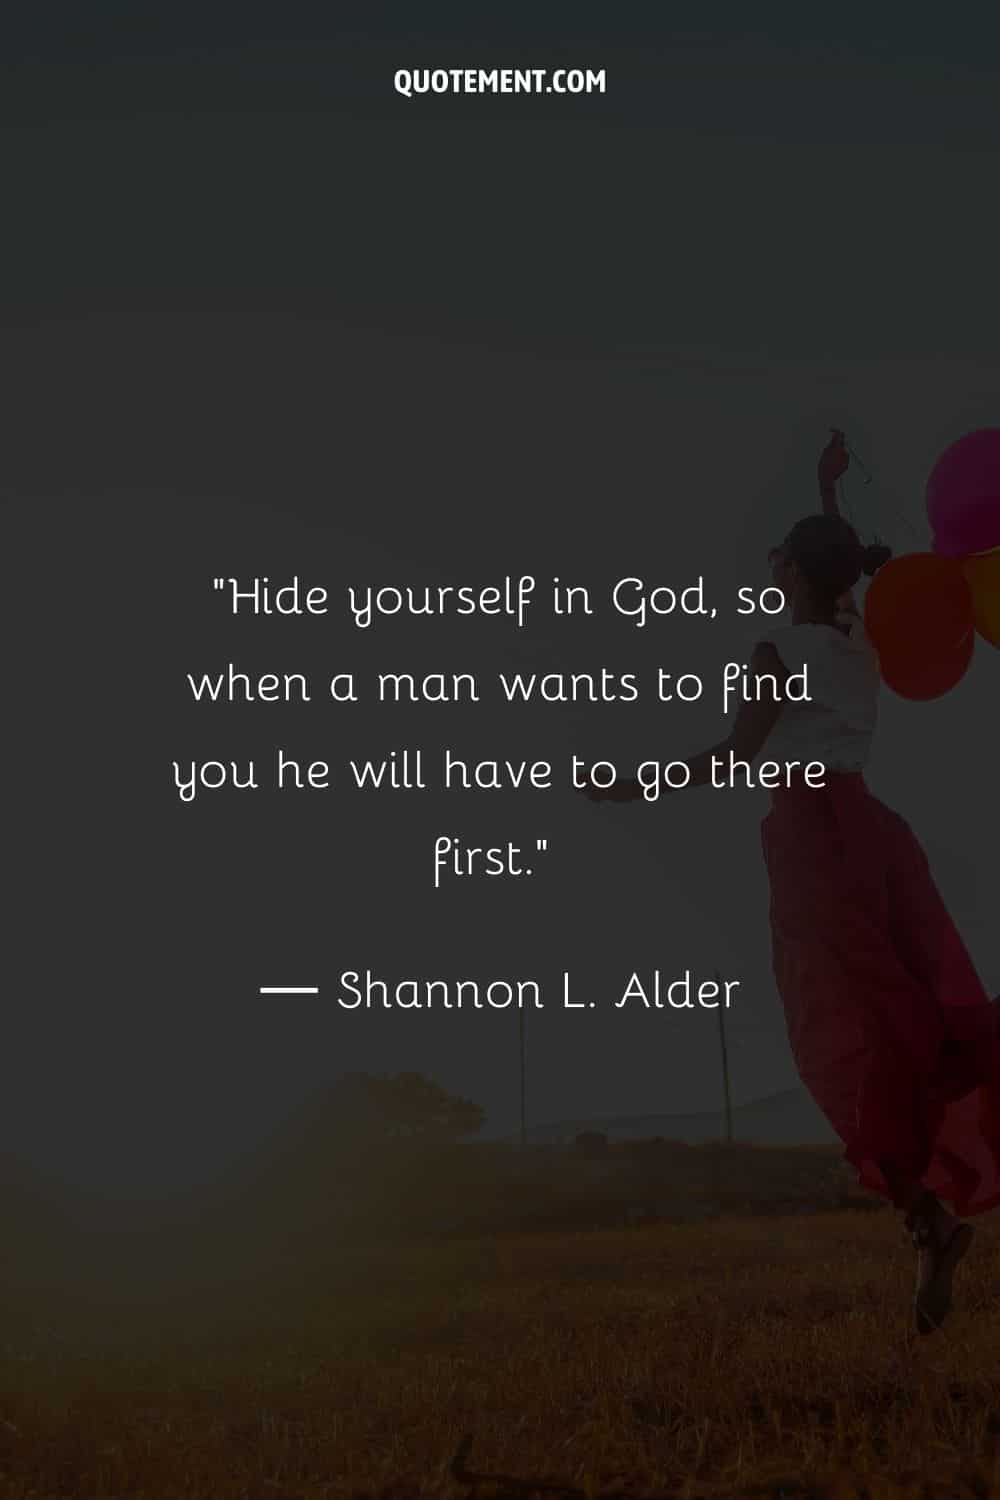 Hide yourself in God, so when a man wants to find you he will have to go there first